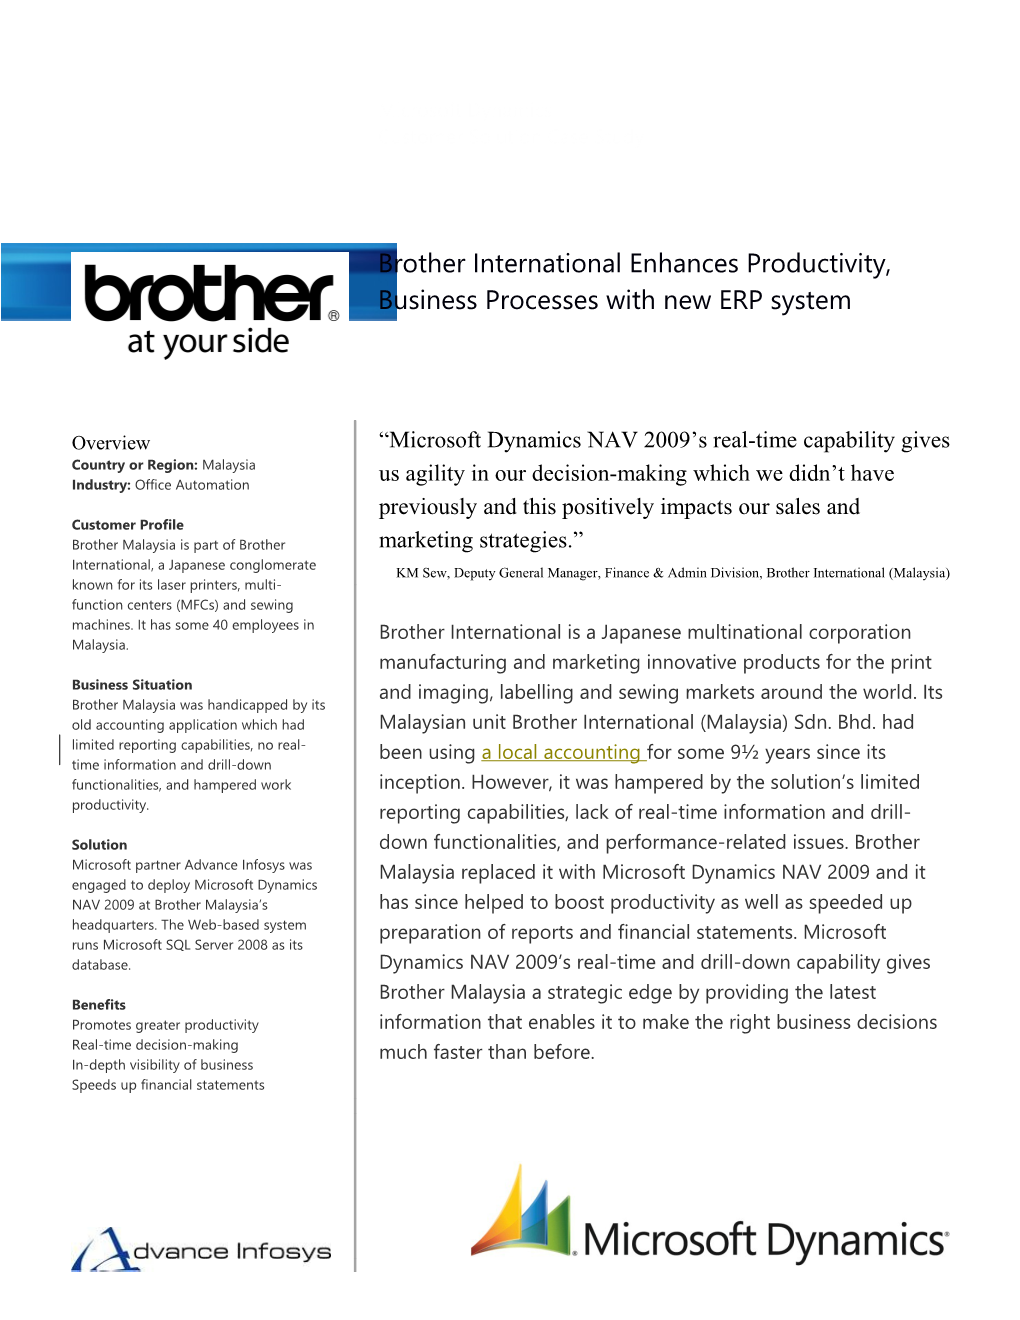 Metia CEP Brother International Enhances Productivity, Business Processes with New ERP System